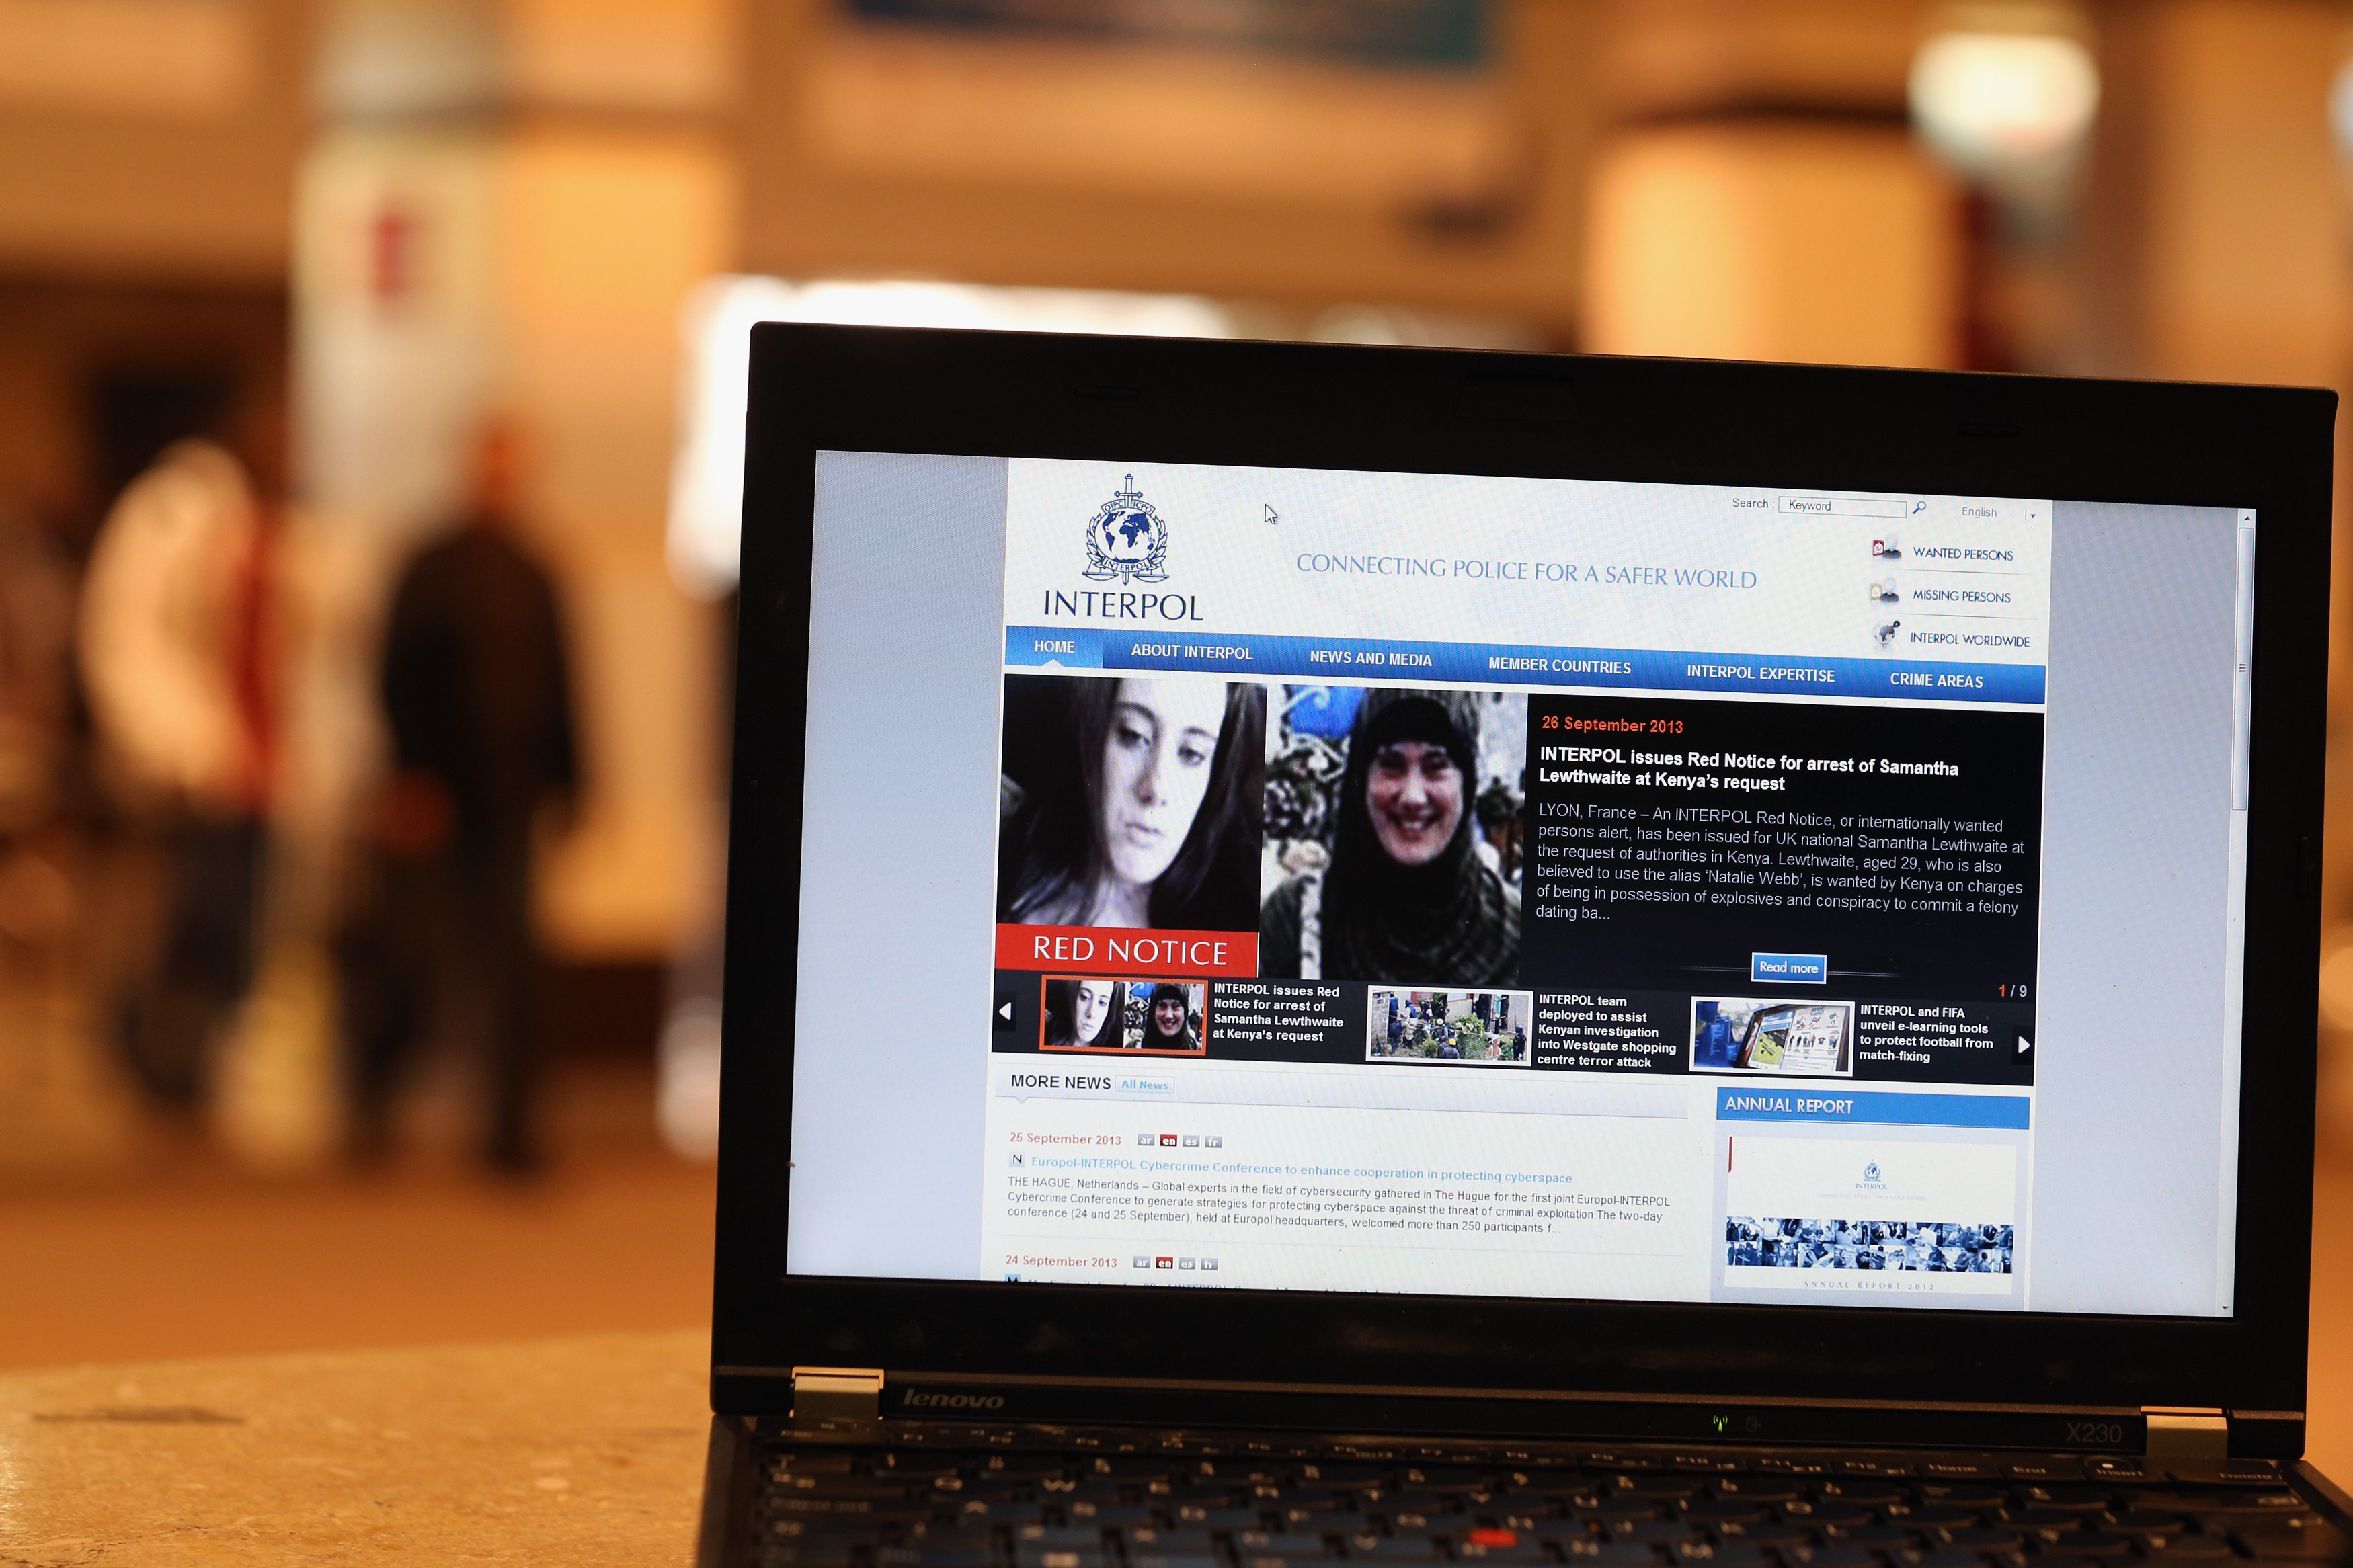 A view of a laptop computer screen showing the Interpol website which features a 'Red Notice' for the arrest of Samantha Lewthwaite